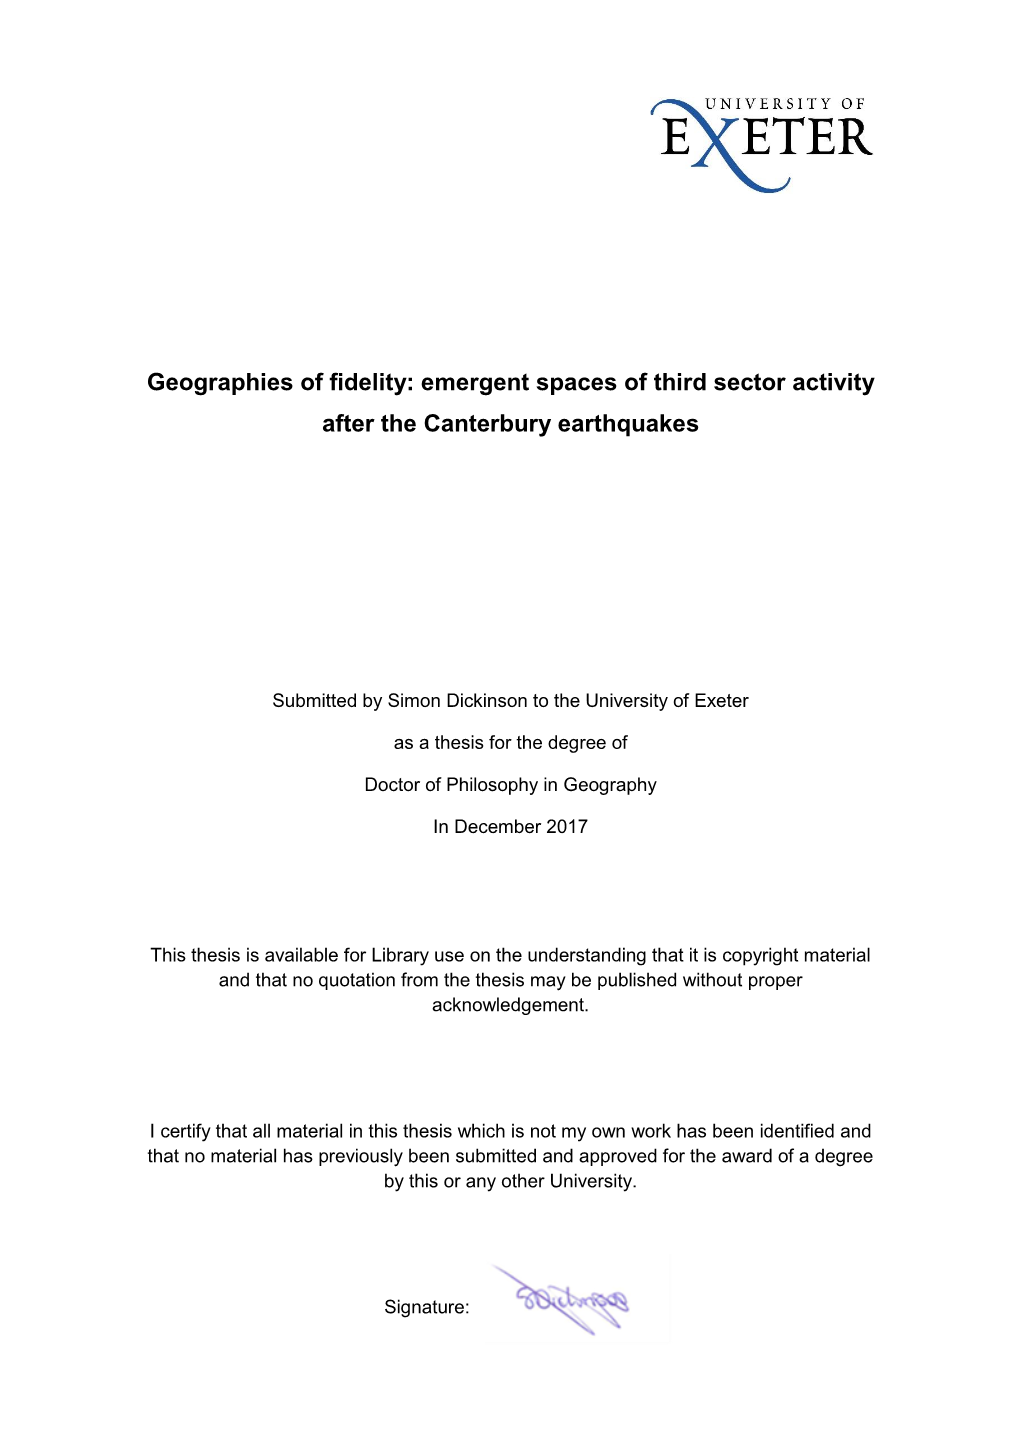 Geographies of Fidelity: Emergent Spaces of Third Sector Activity After the Canterbury Earthquakes